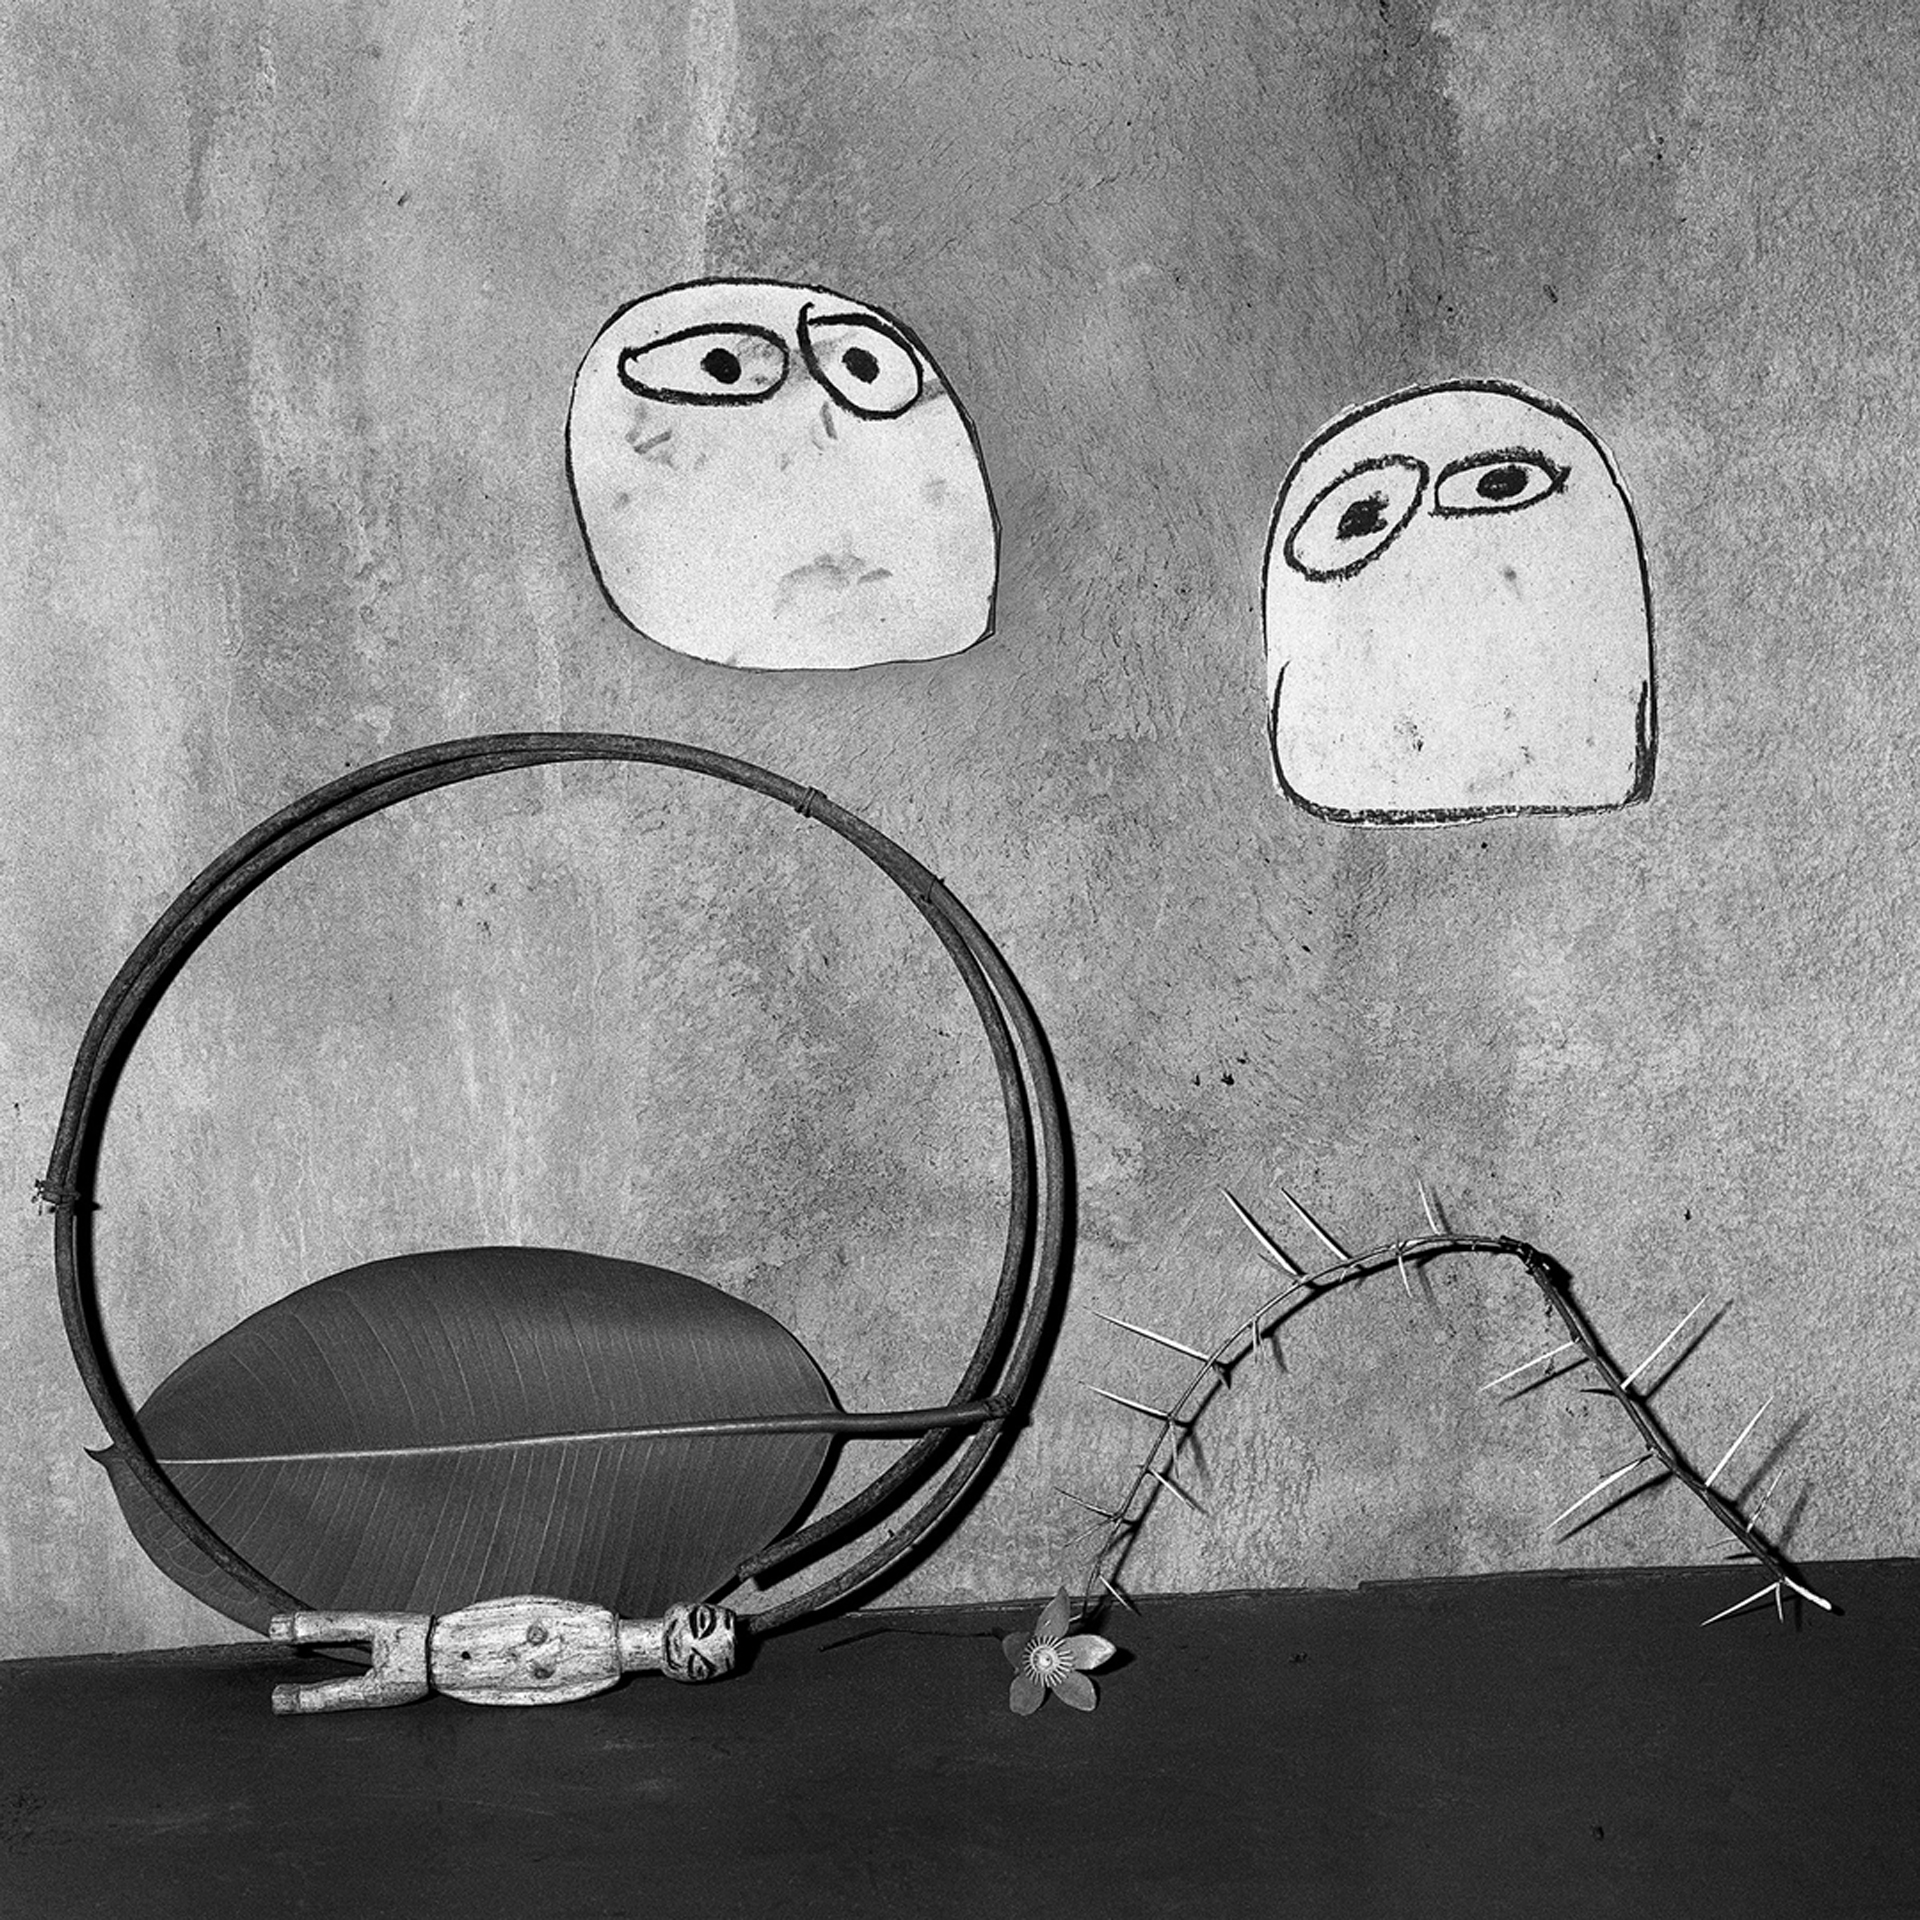 The changing aesthetic of Roger Ballen